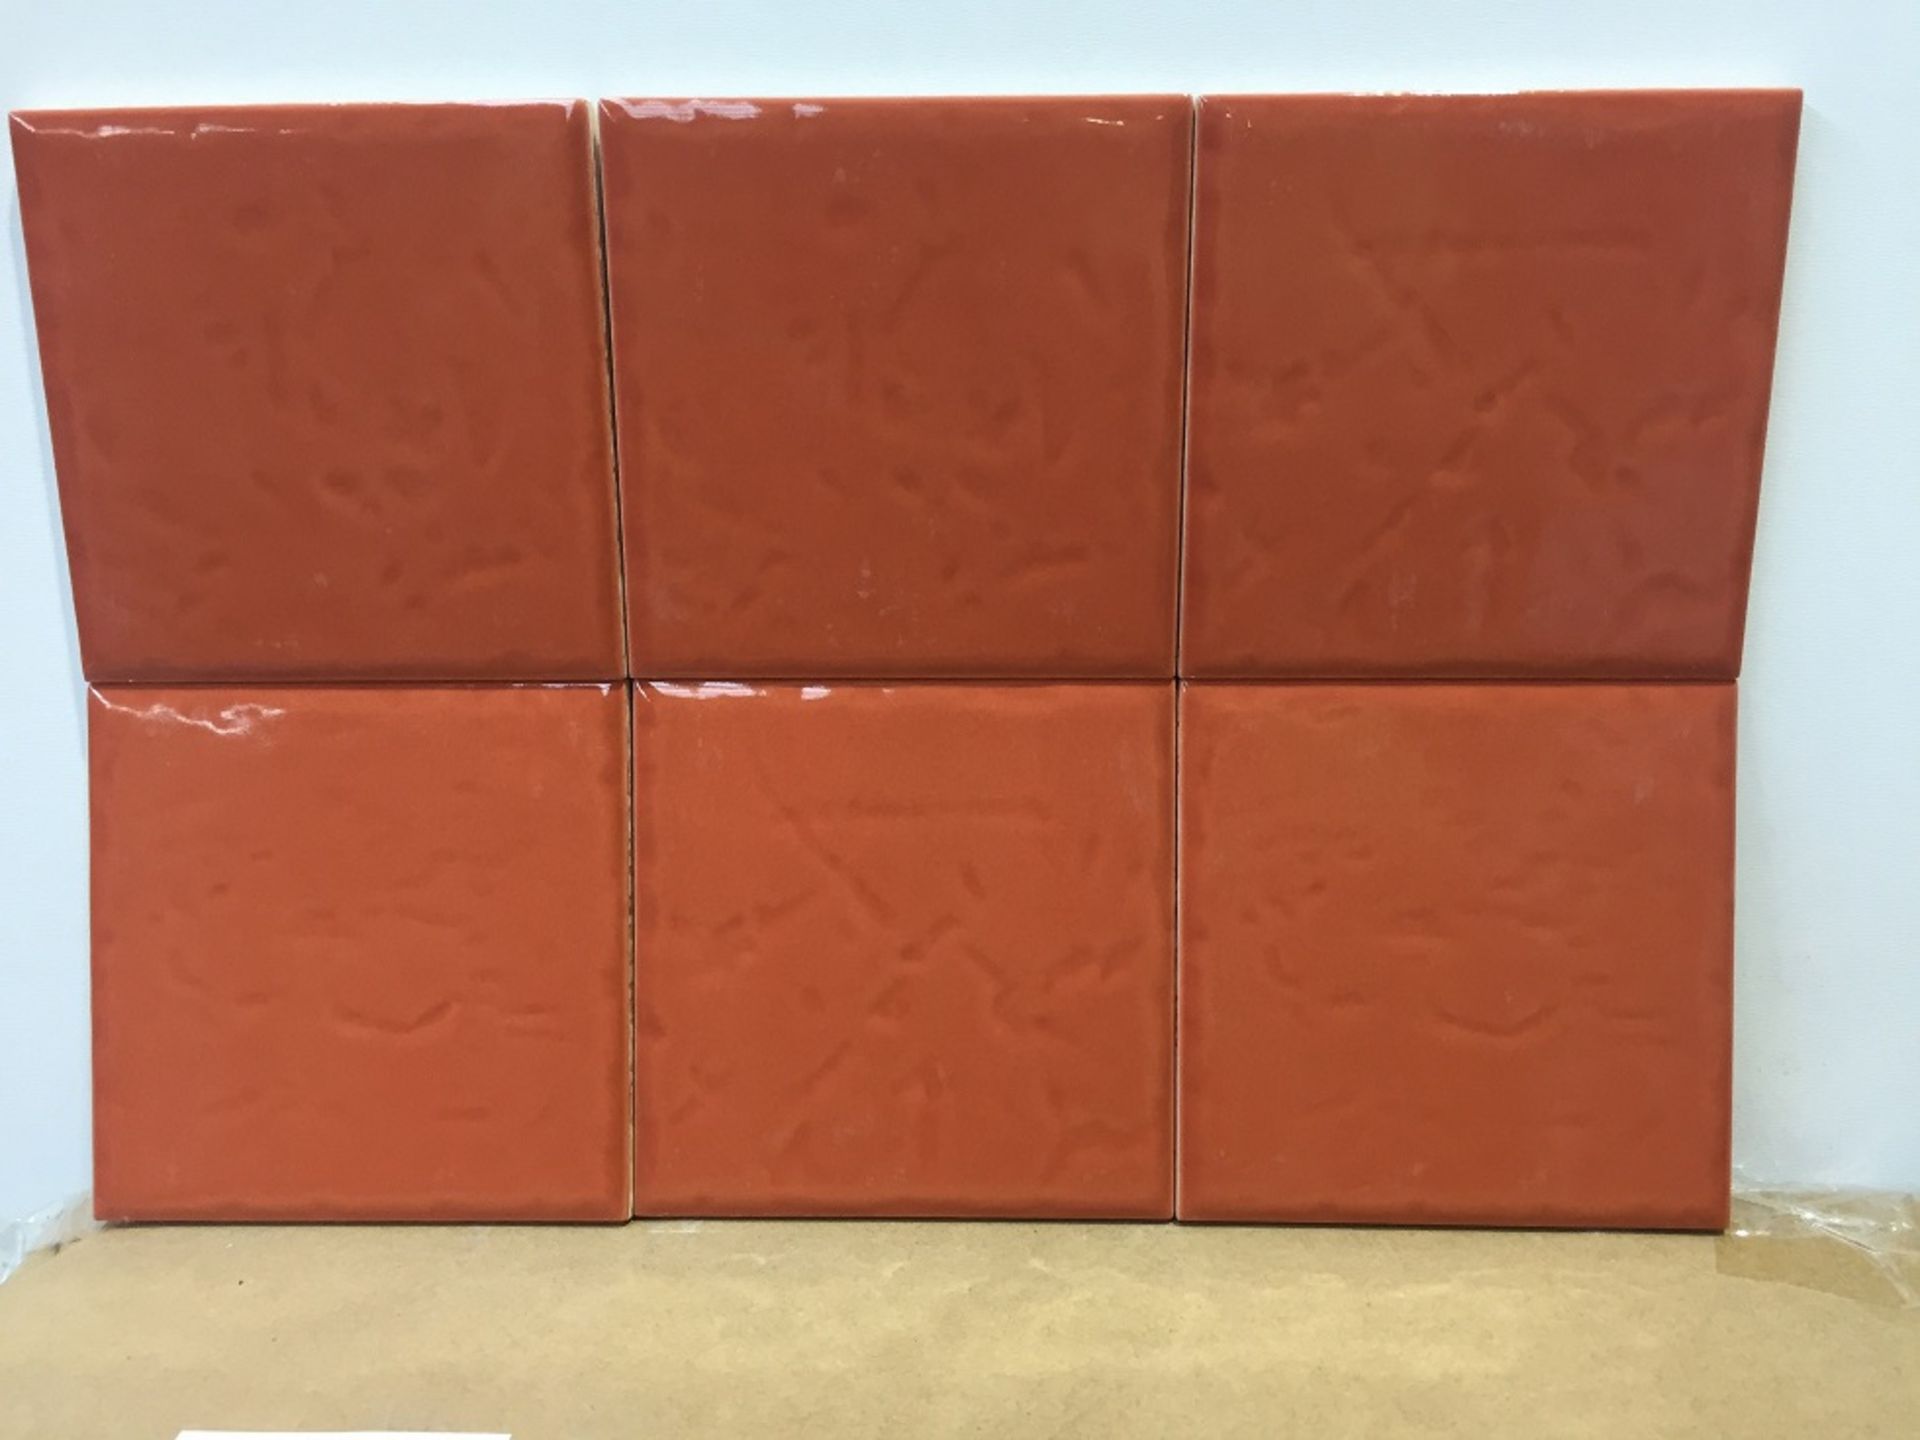 4 BRAND NEW BOXES OF JOHNSONS BATHROOM TILES IN COTSWOLD TERRACOTTA, 25 TILES TO A BOX, 10CM X 10CM,